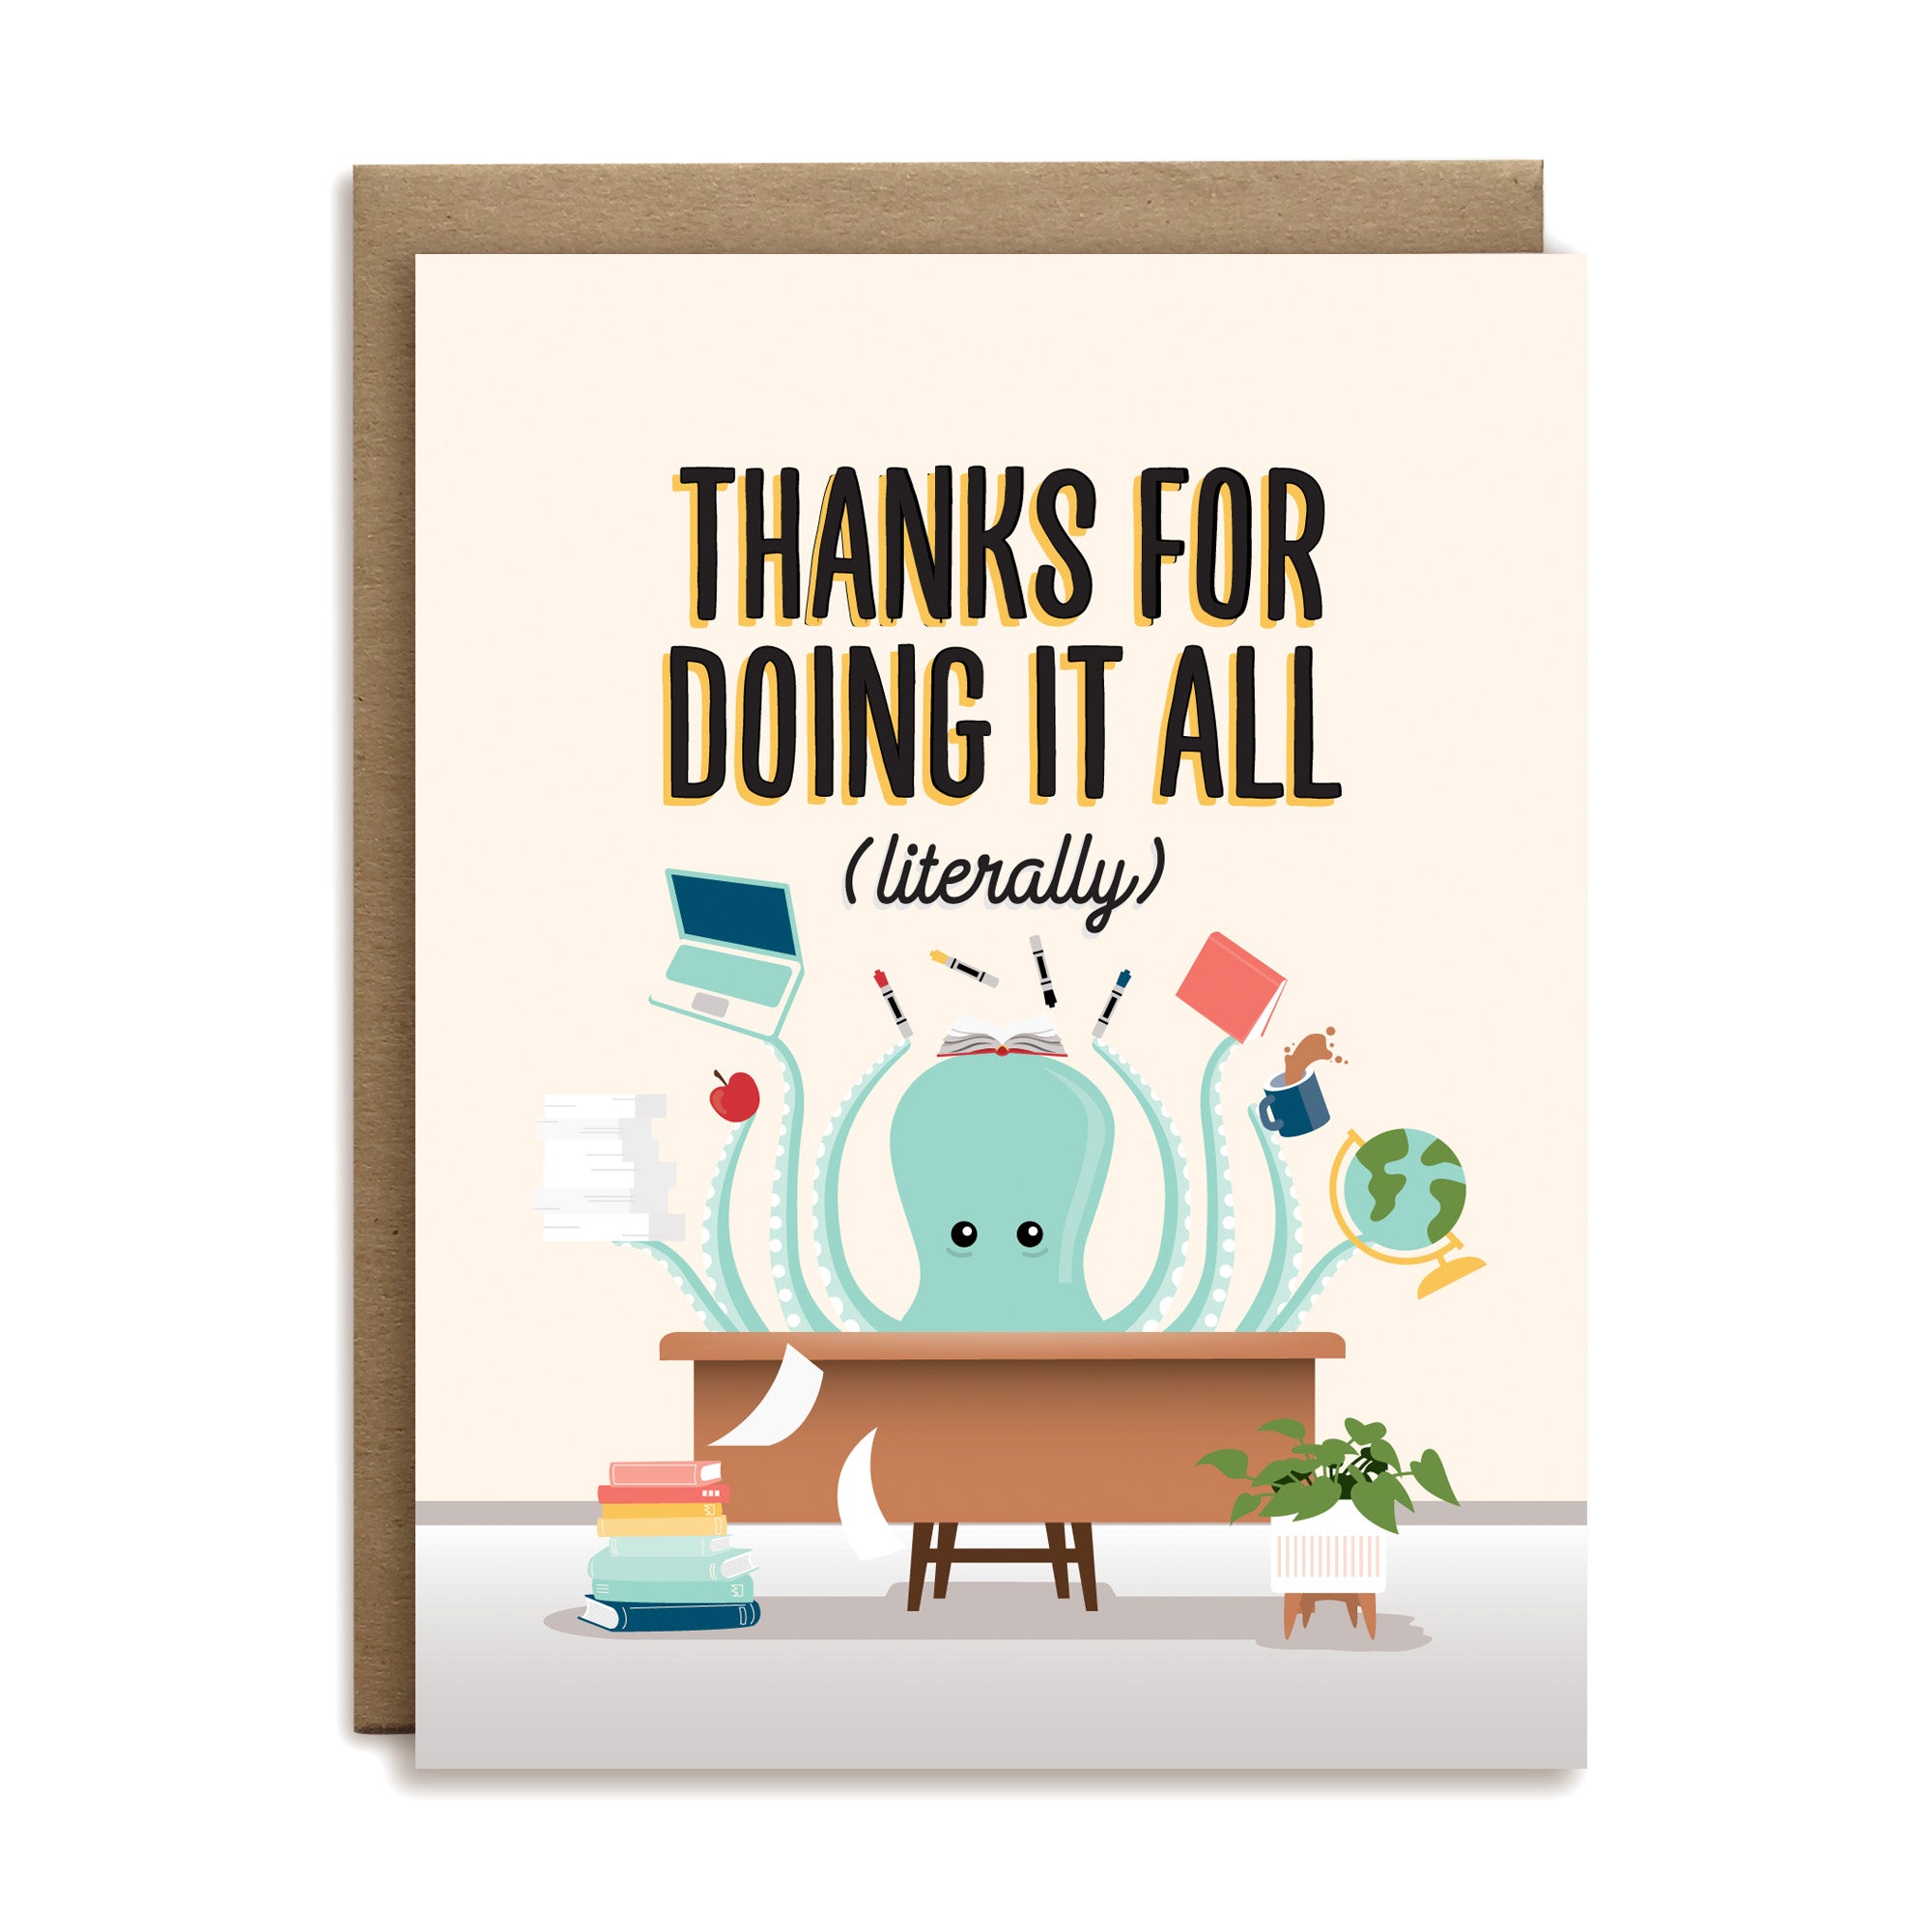 Thank you for doing it all (literally) thank you teacher greeting card by I&